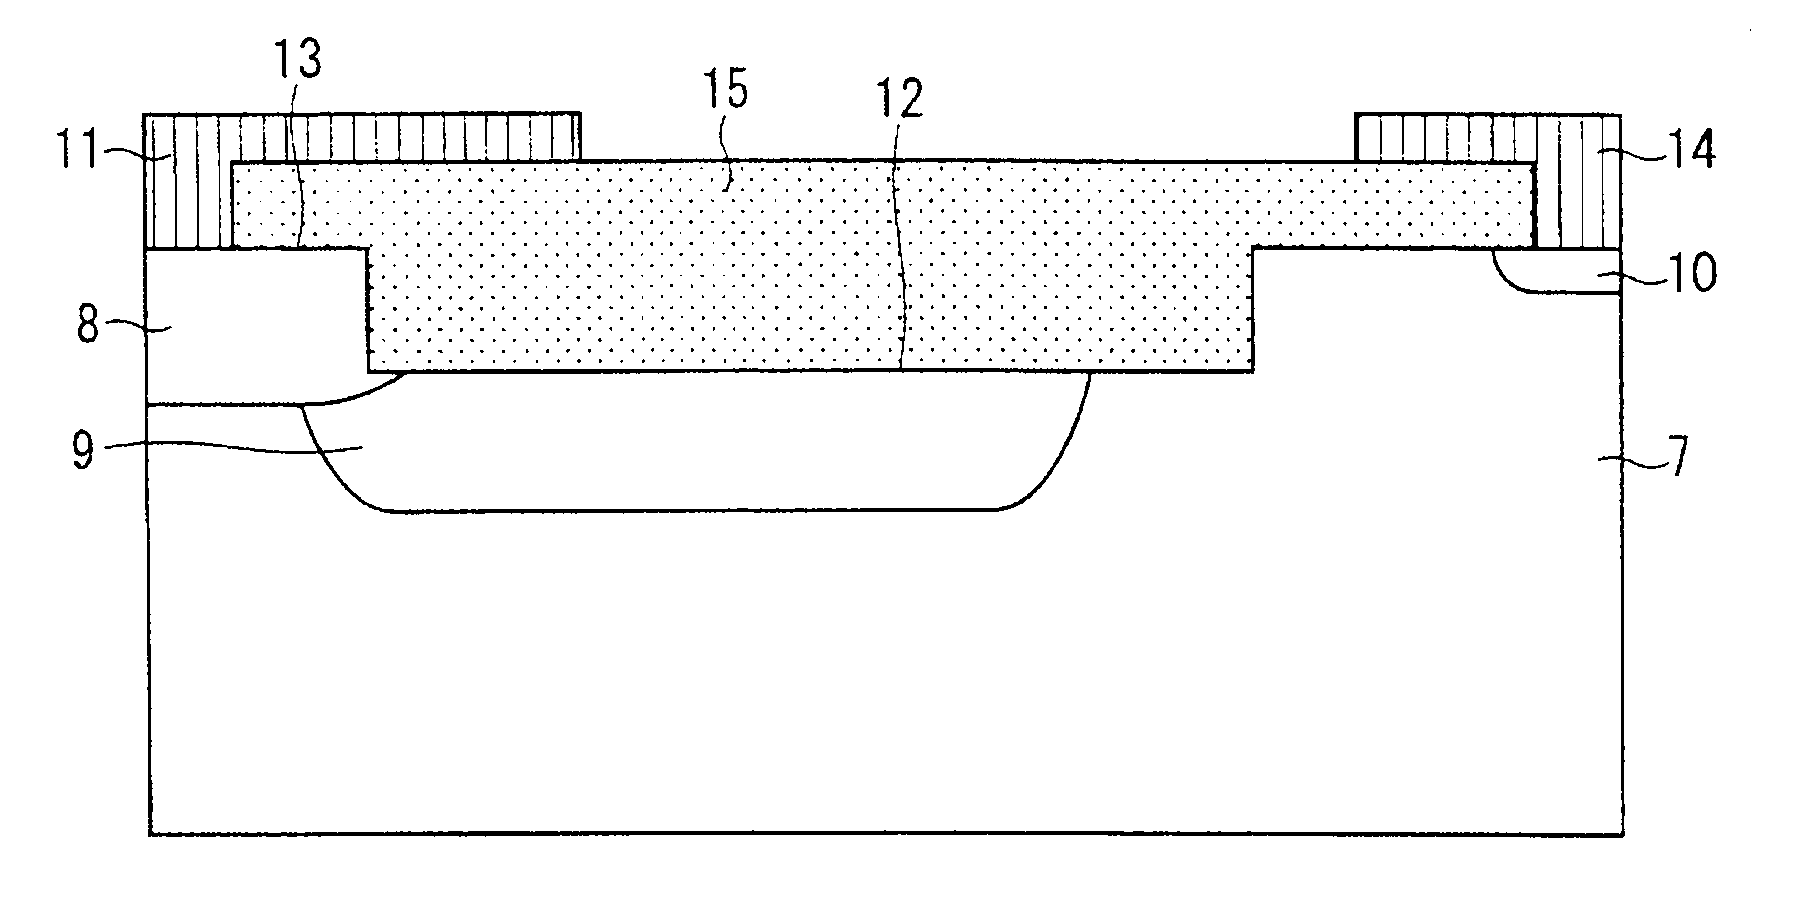 Semiconductor device and method of manufacturing a semiconductor device